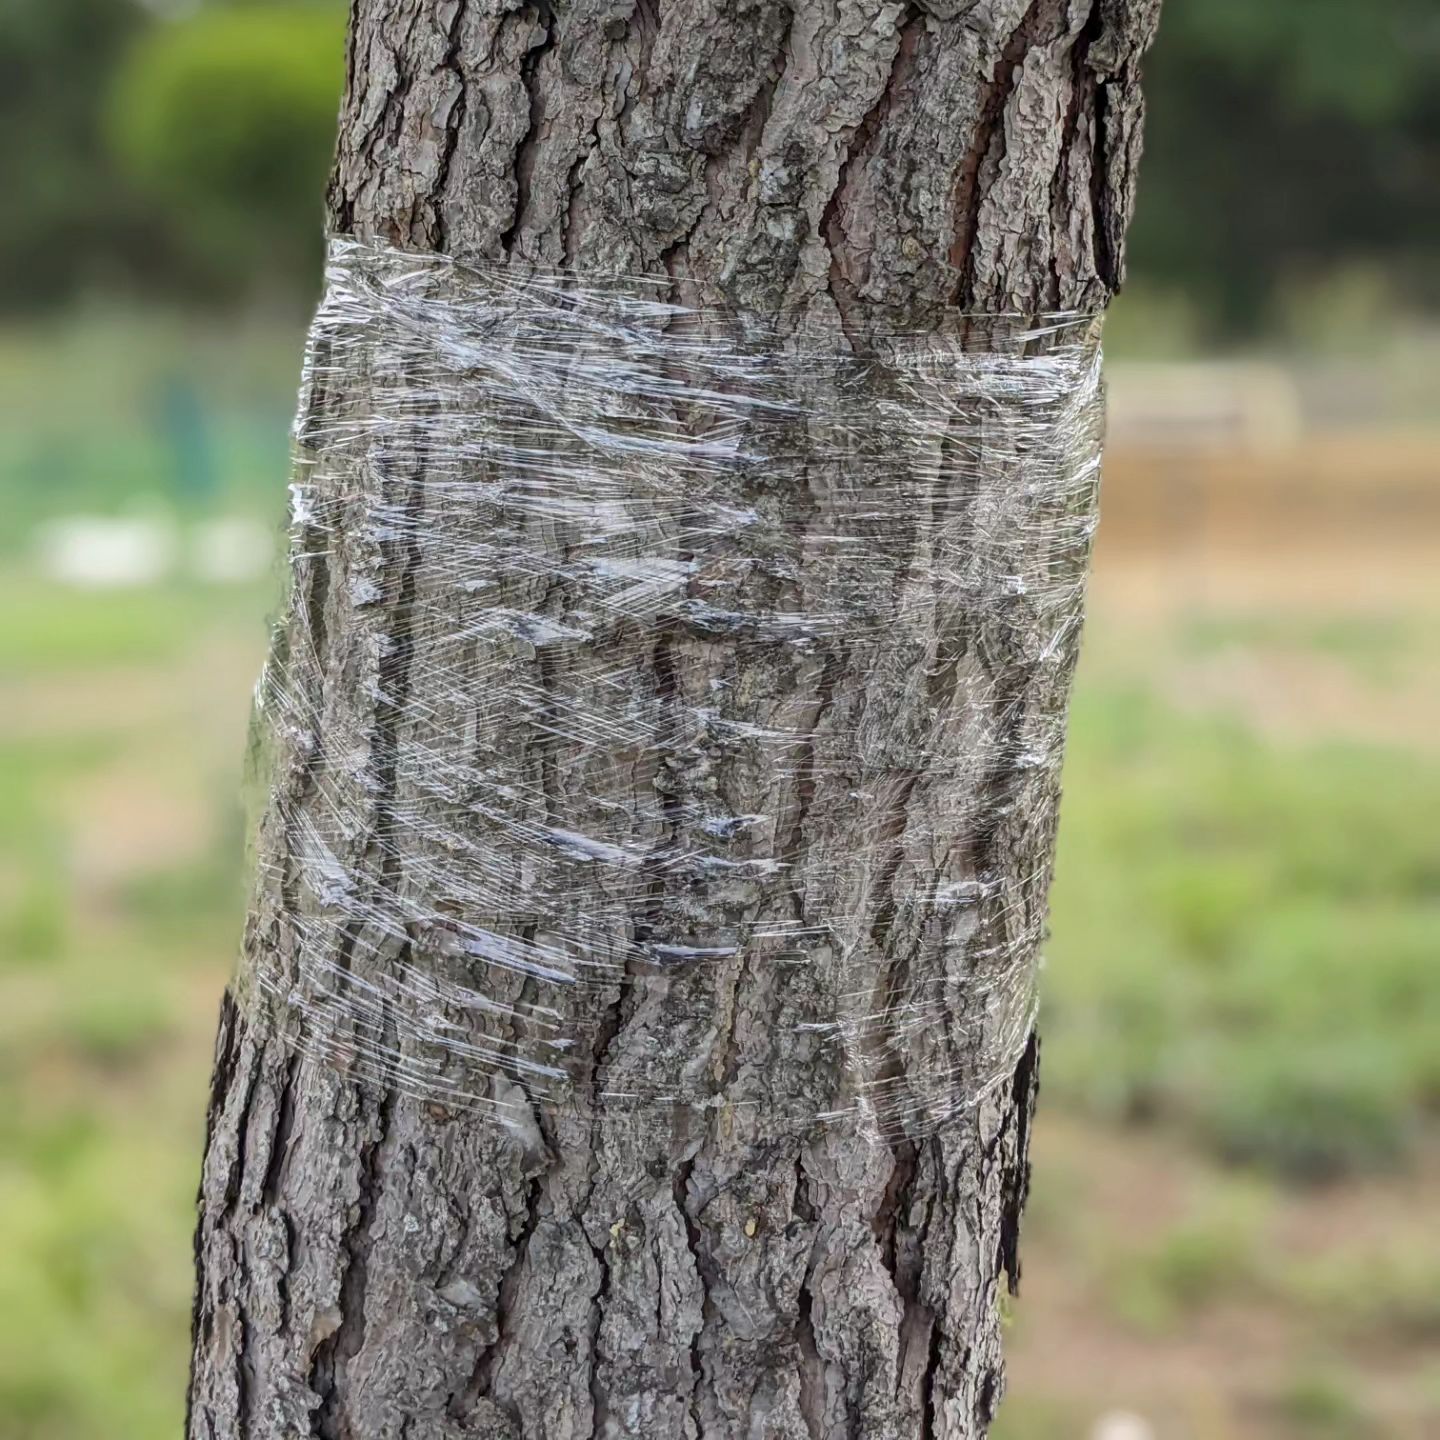 Wrapping cling film around the trunks of pine trees in the garden and close vicinity